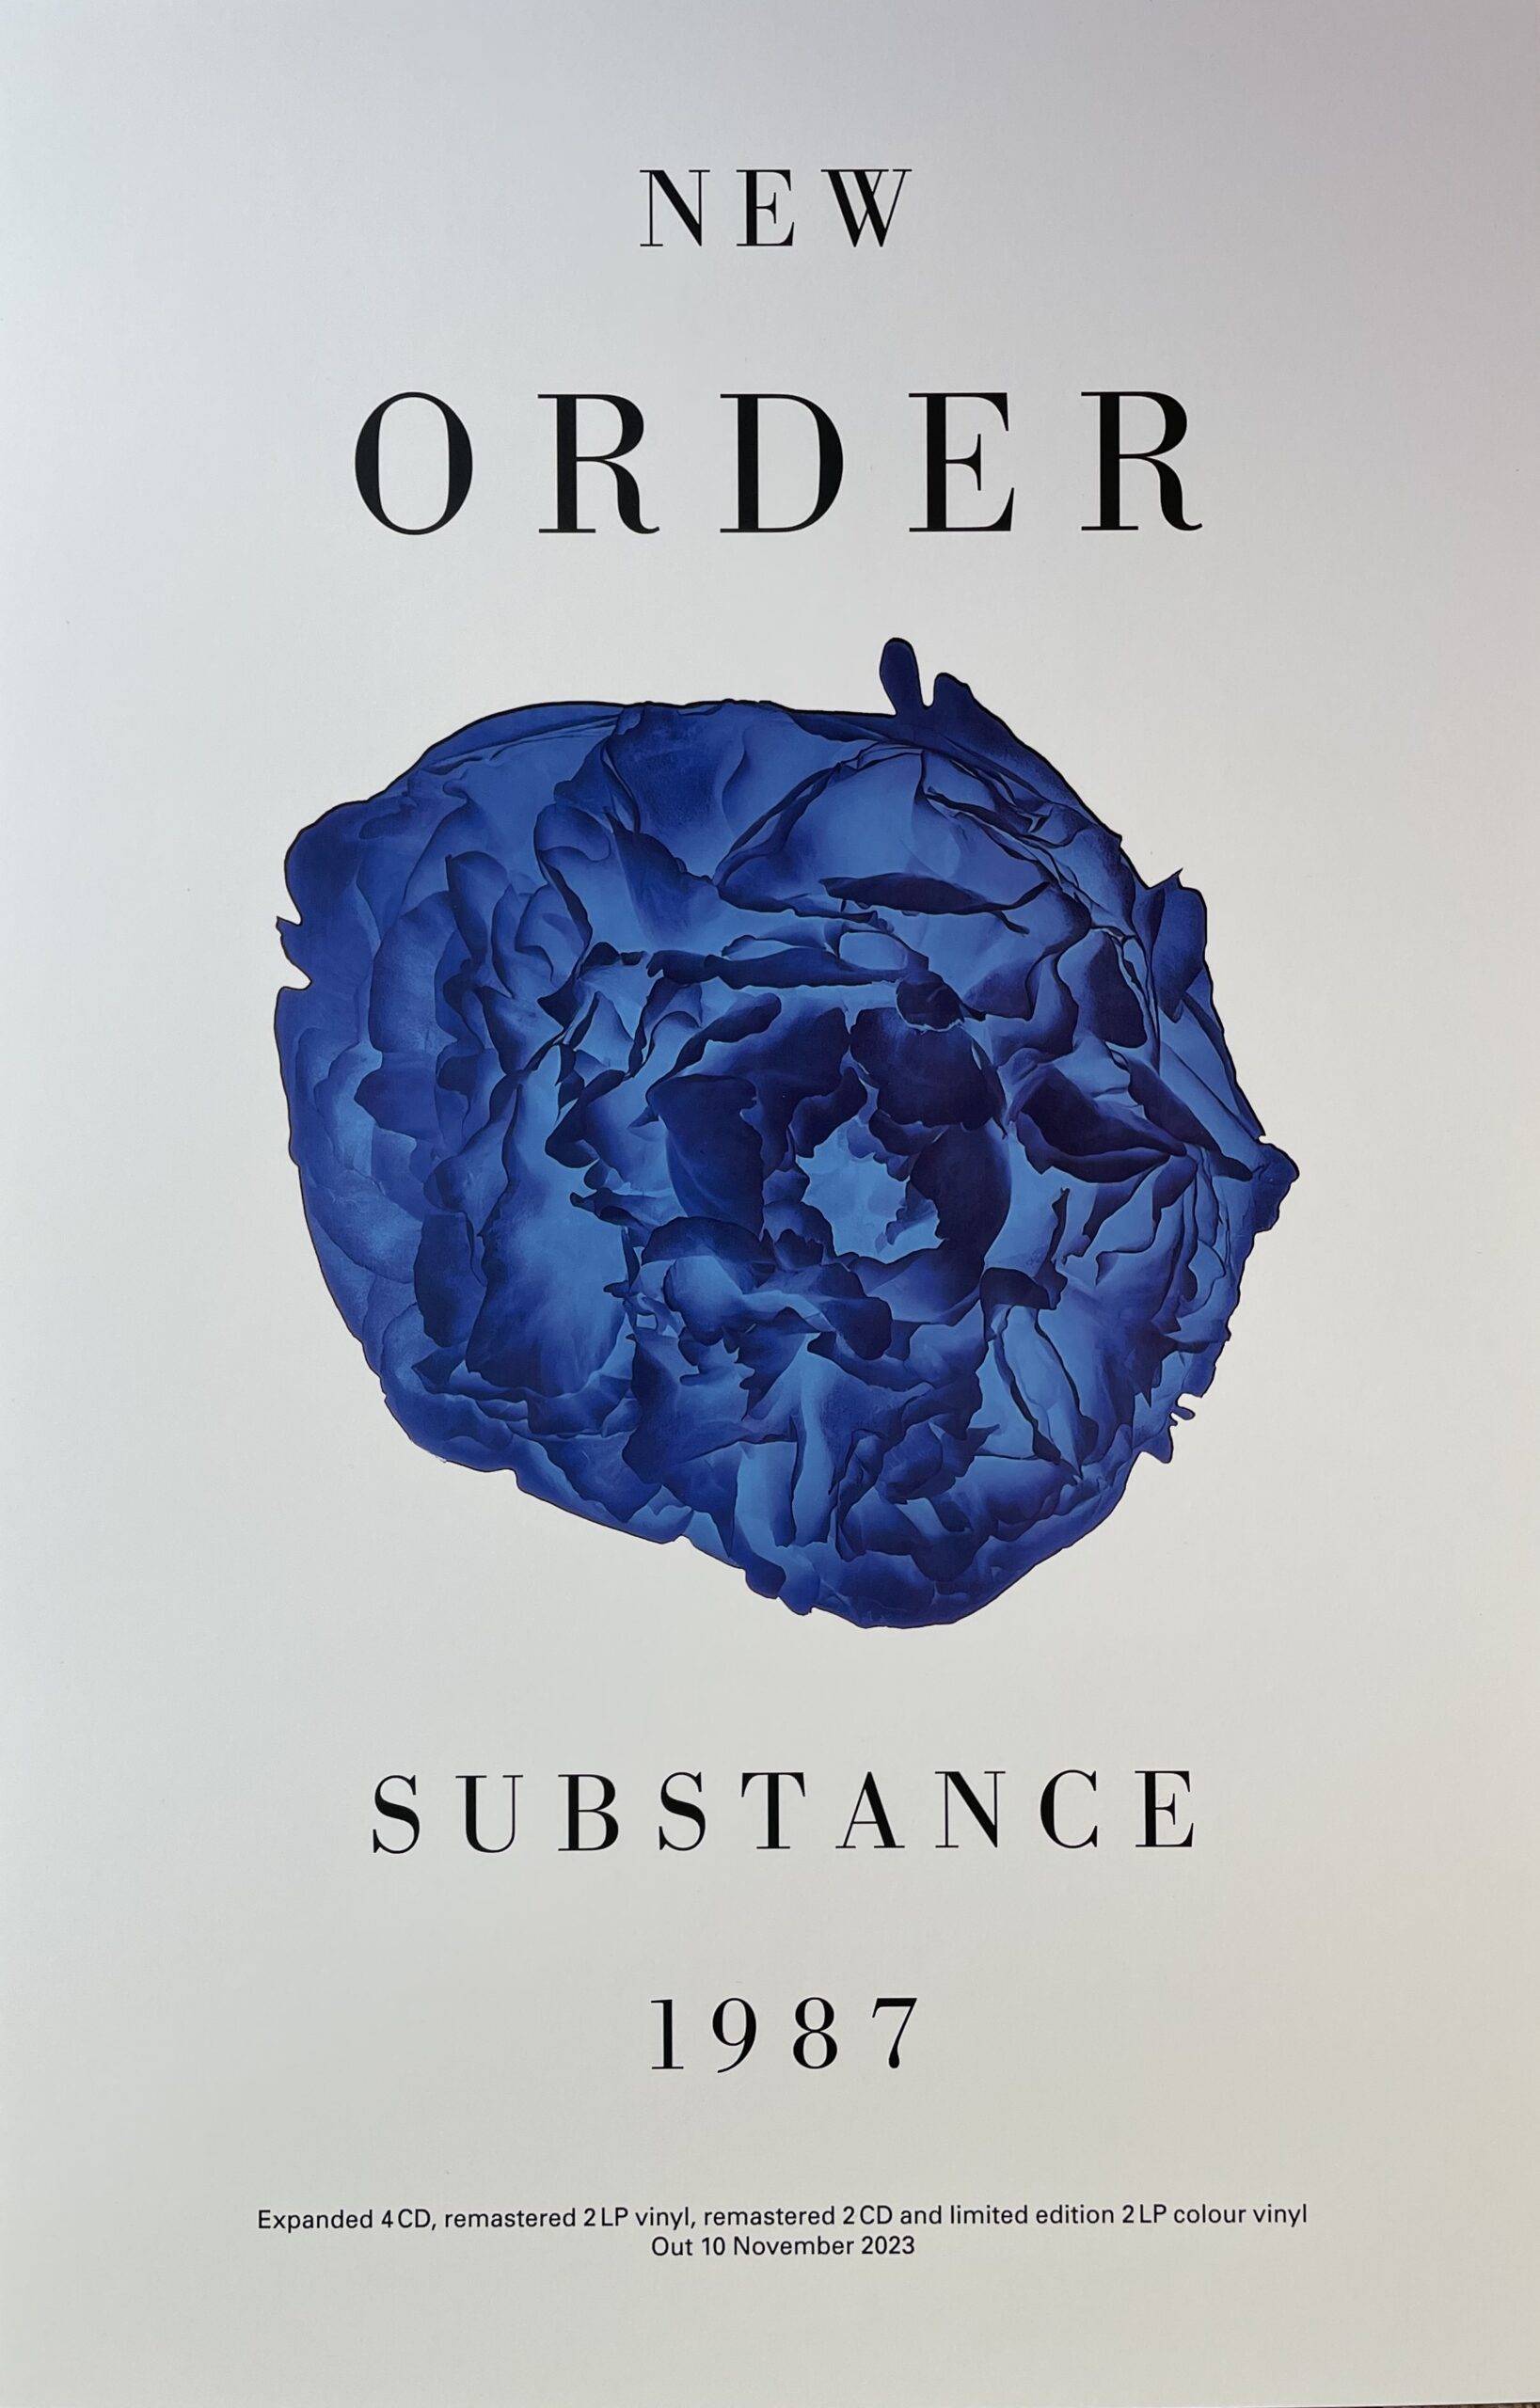 New Order - Substance 1987 is available to pre-order on 2LP, 2CD